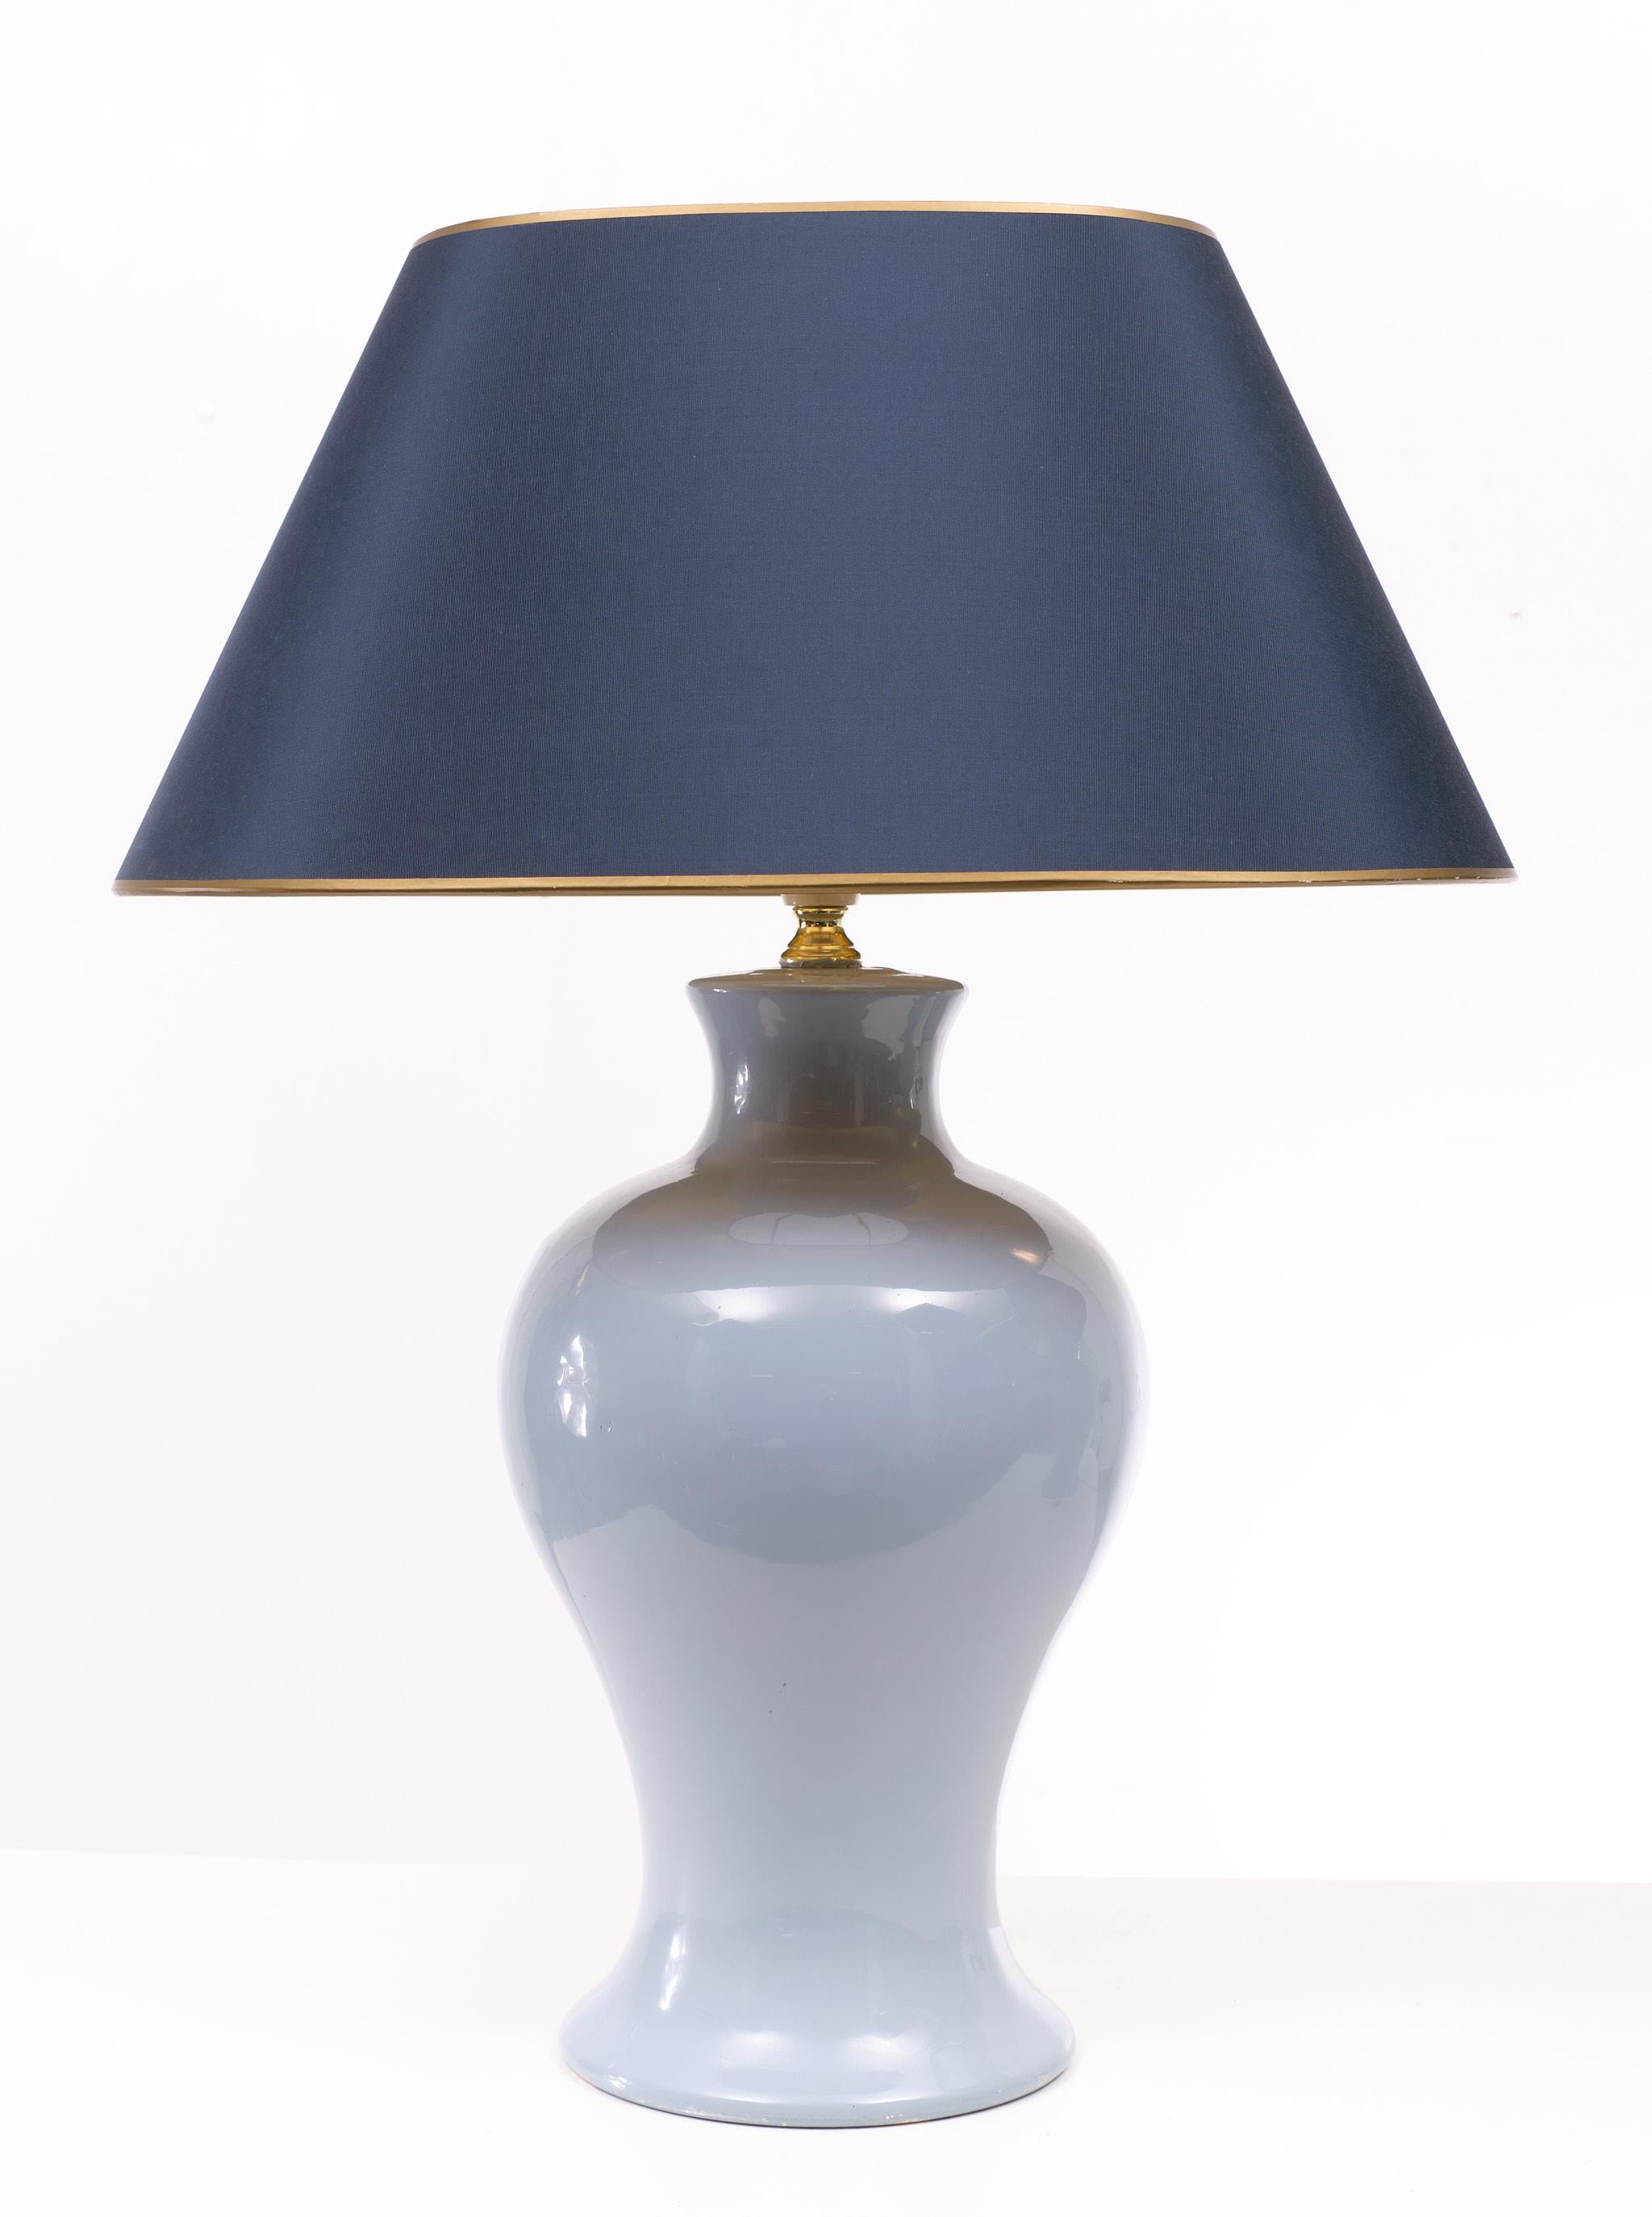 Classic traditional table lamps, comes in a beathiful light blue color.
Complete with Silk oval shaped shades with Gold interior.
One large E27 bulb needed. 1970s France.